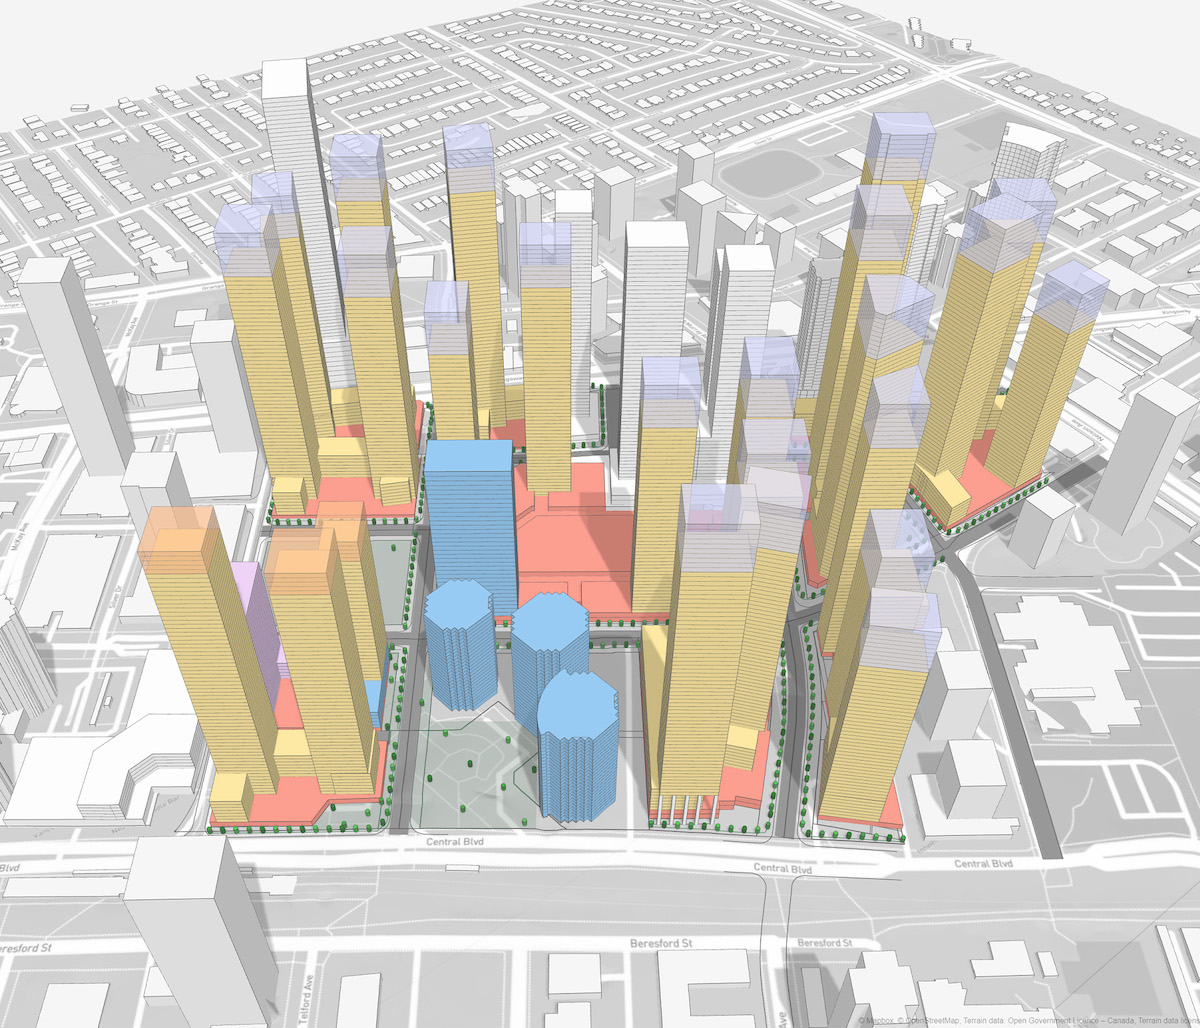 An architectural rendering of the towers part of the Metropolis redevelopment in yellow, pink, blue and purple.